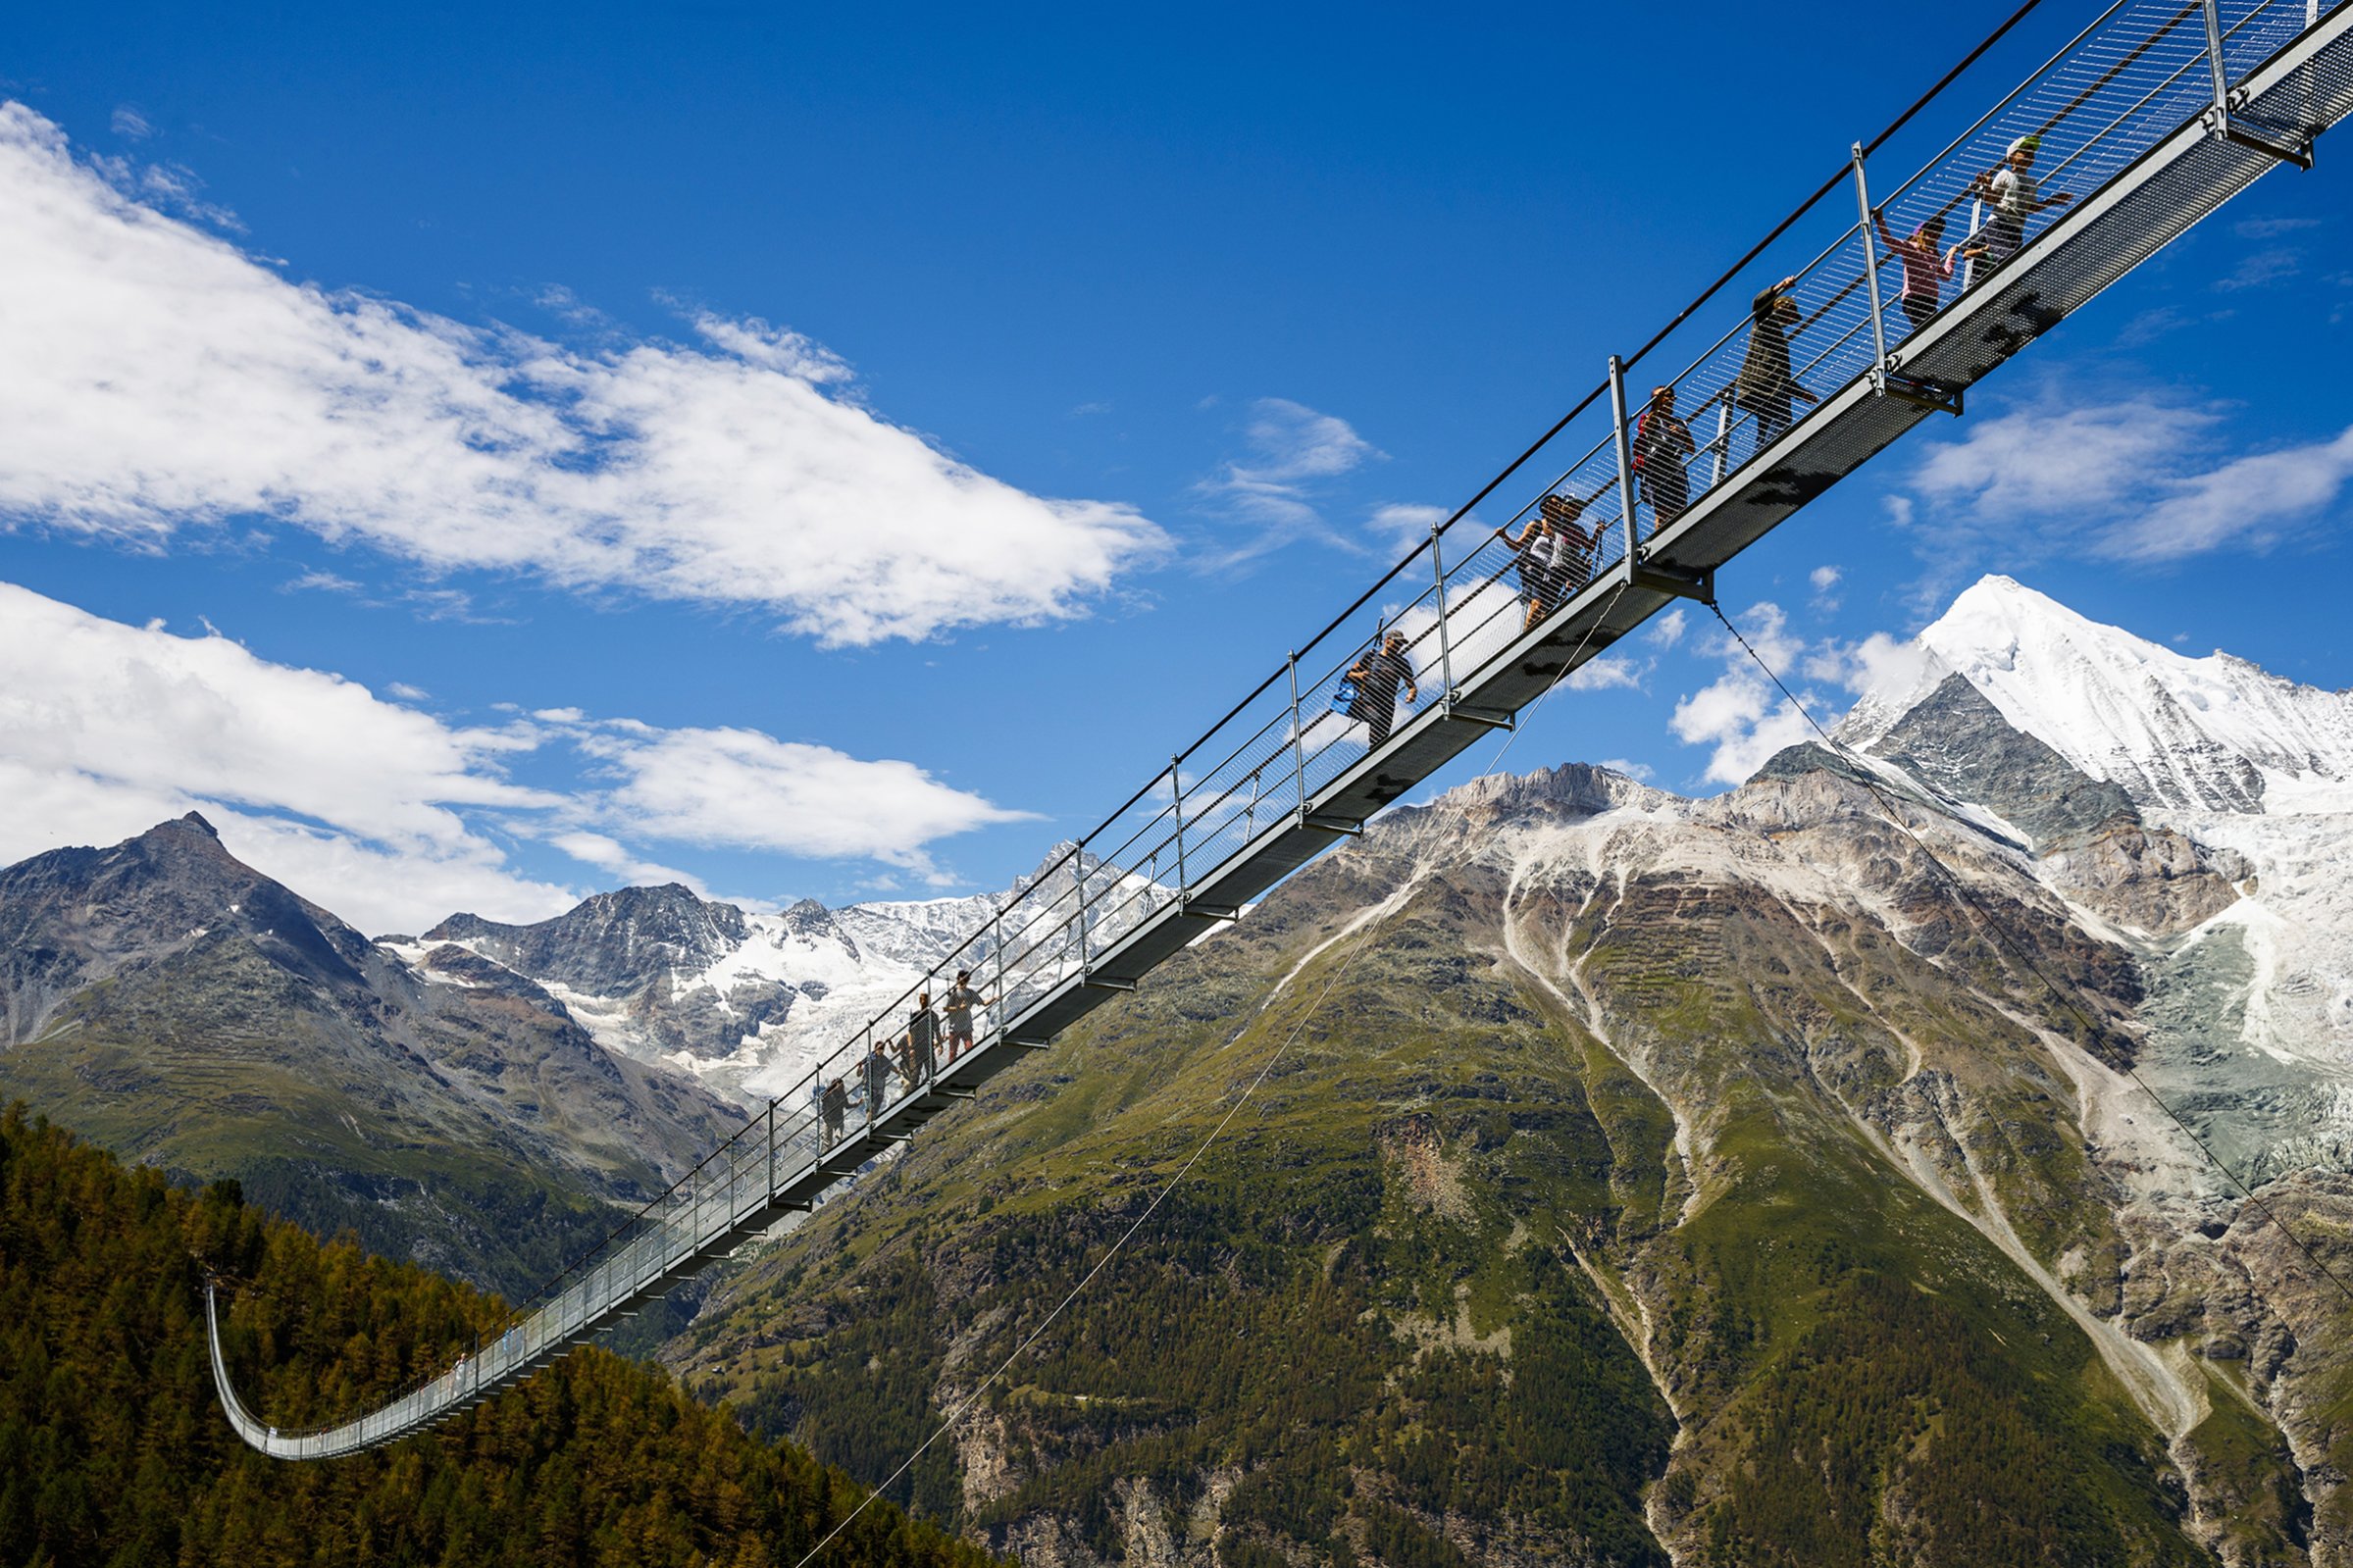 People walk on the 'The Charles Kuonen Suspension Bridge', the world's longest pedestrian suspension bridge with a length of 494m, after the official inauguration of the construction in Randa, Switzerland, July 29, 2017.